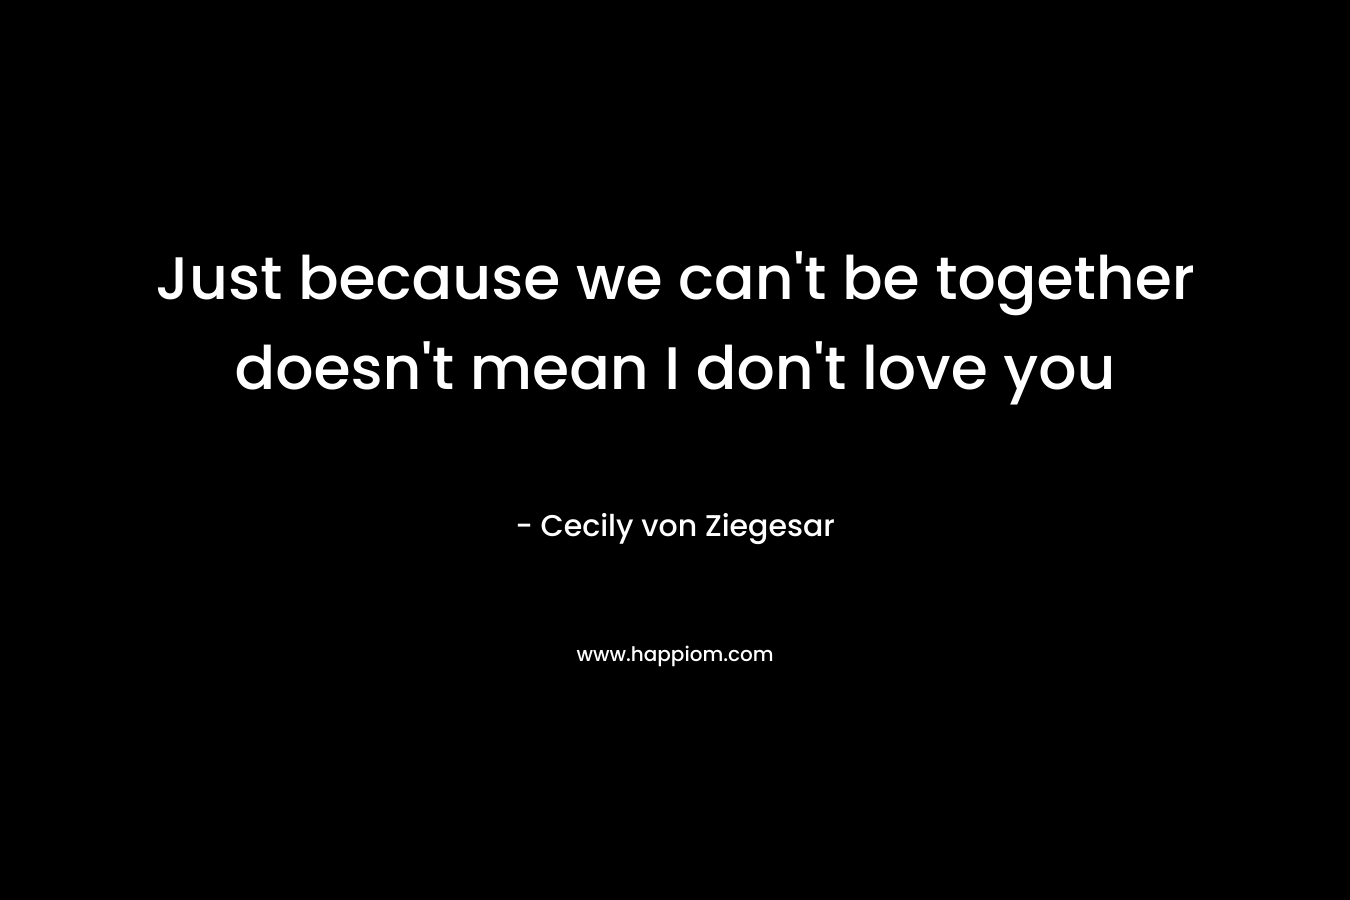 Just because we can’t be together doesn’t mean I don’t love you – Cecily von Ziegesar